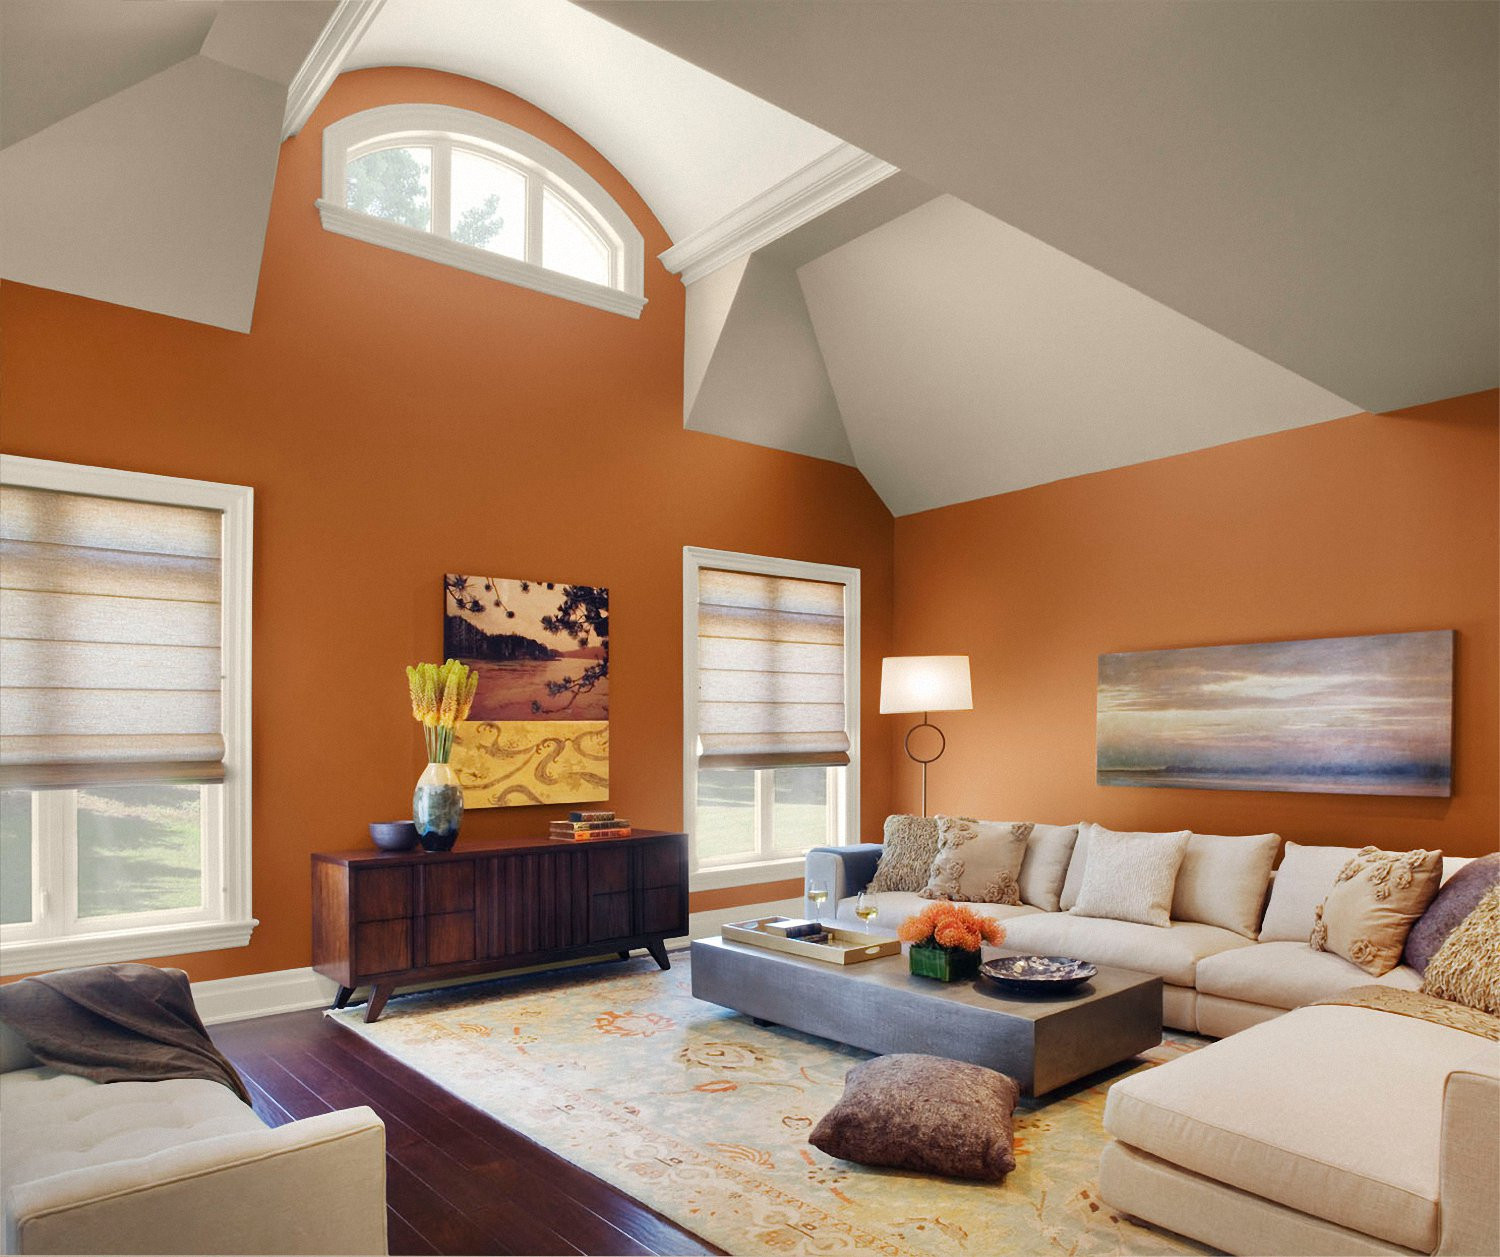 Interior Paint Ideas Living Room
 Best Interior Paint for Appealing Colorful Home Interior